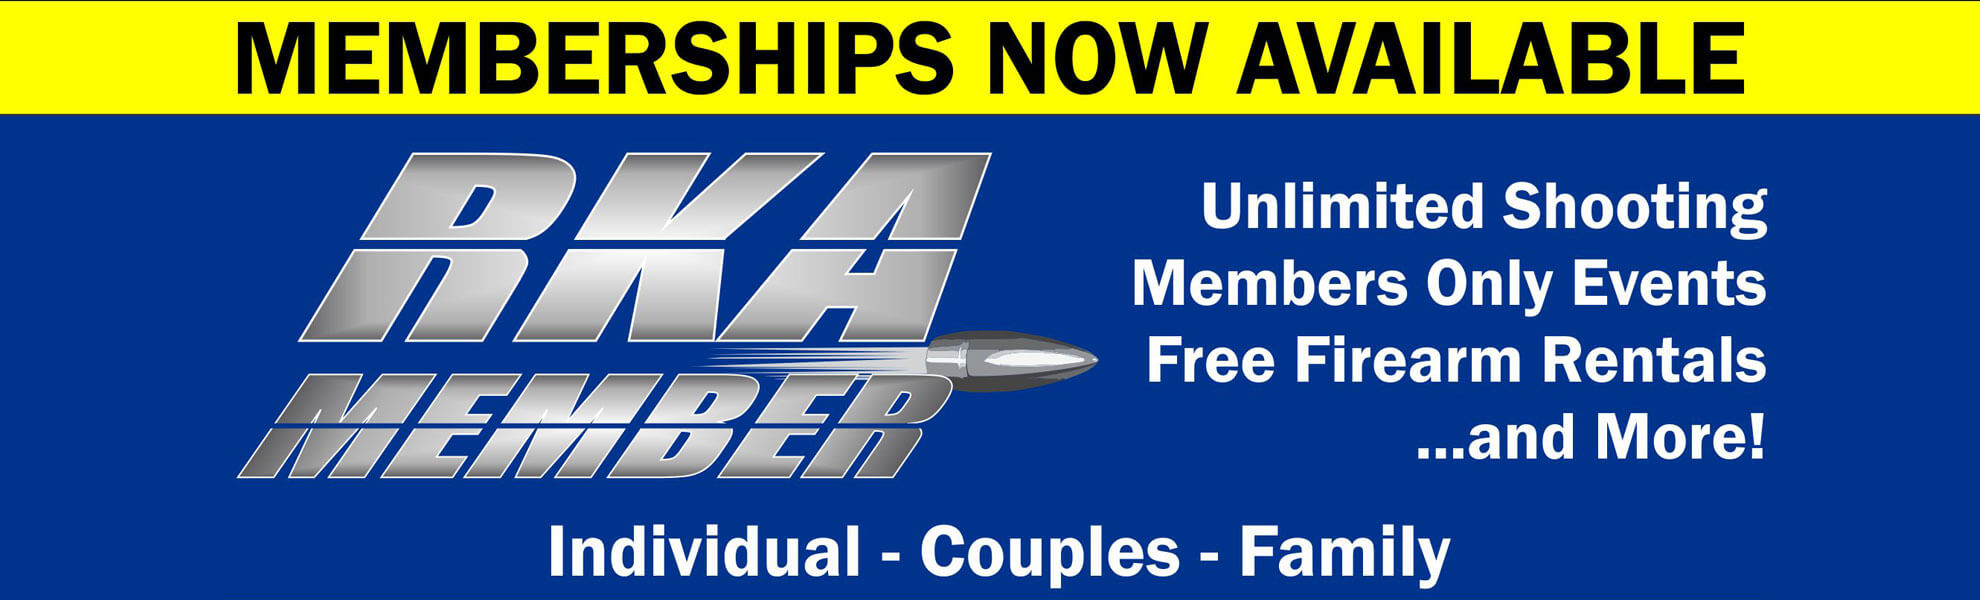 Memberships Now Available